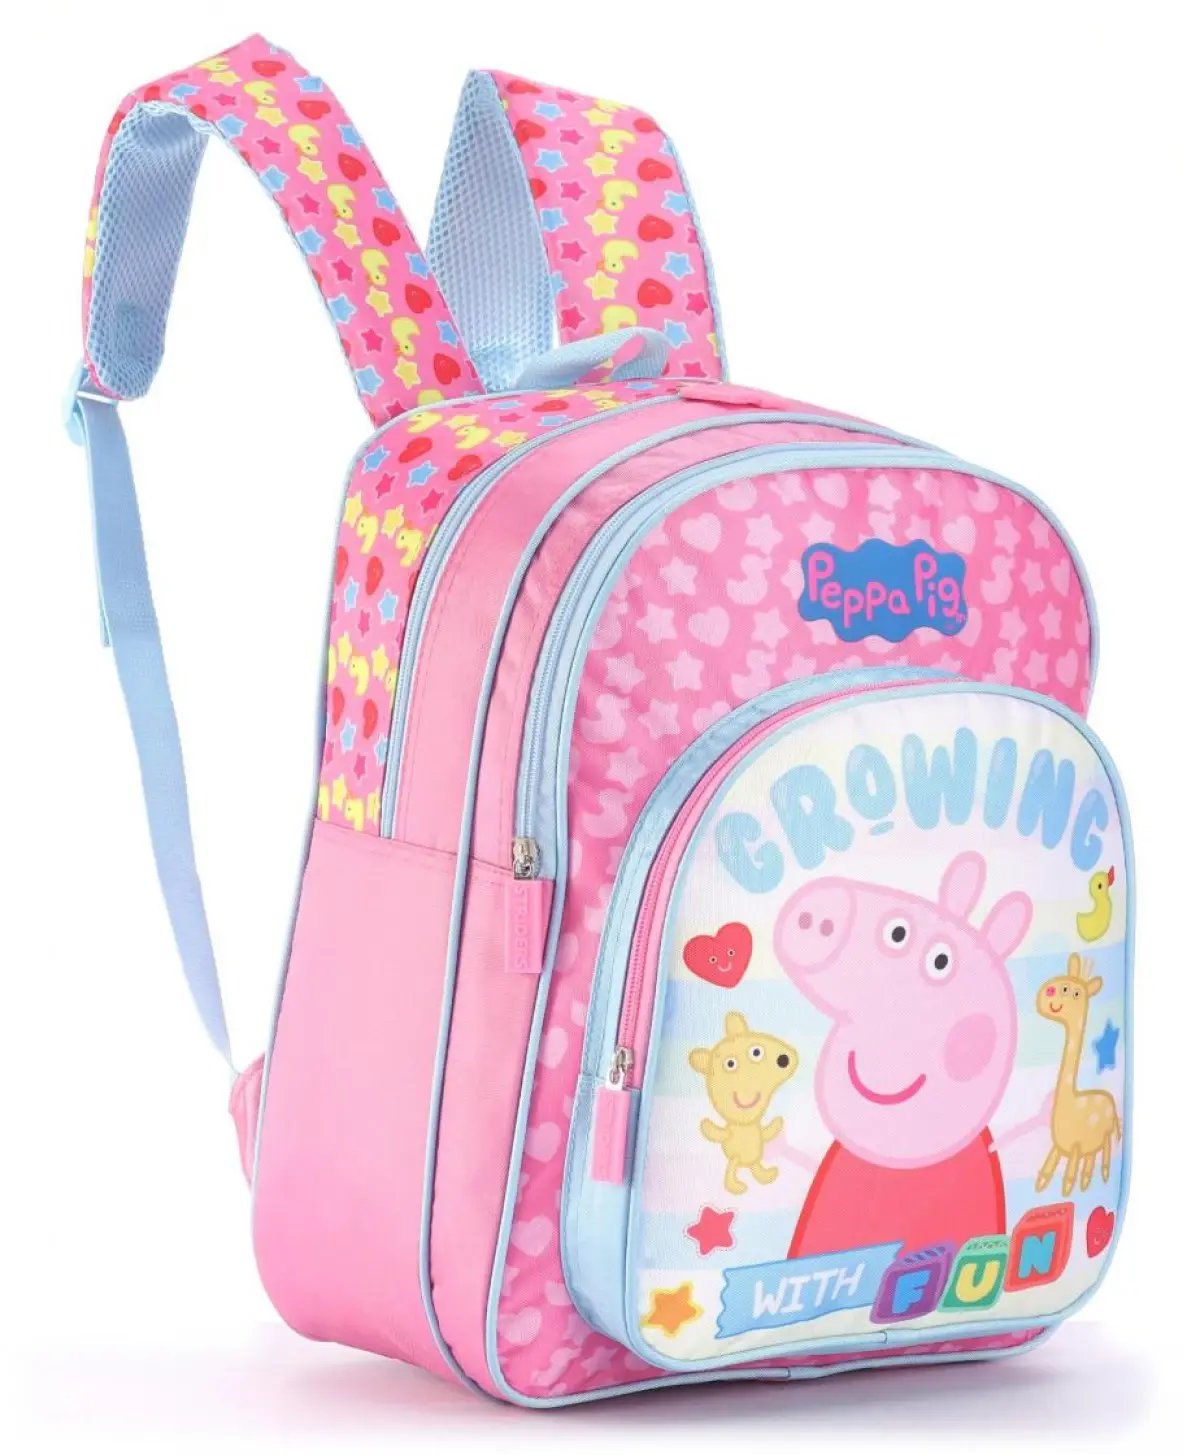 Striders 16 inches Peppa Pig-Inspired School Bag for Little Explorers Multicolor For Kids Ages 6Y+